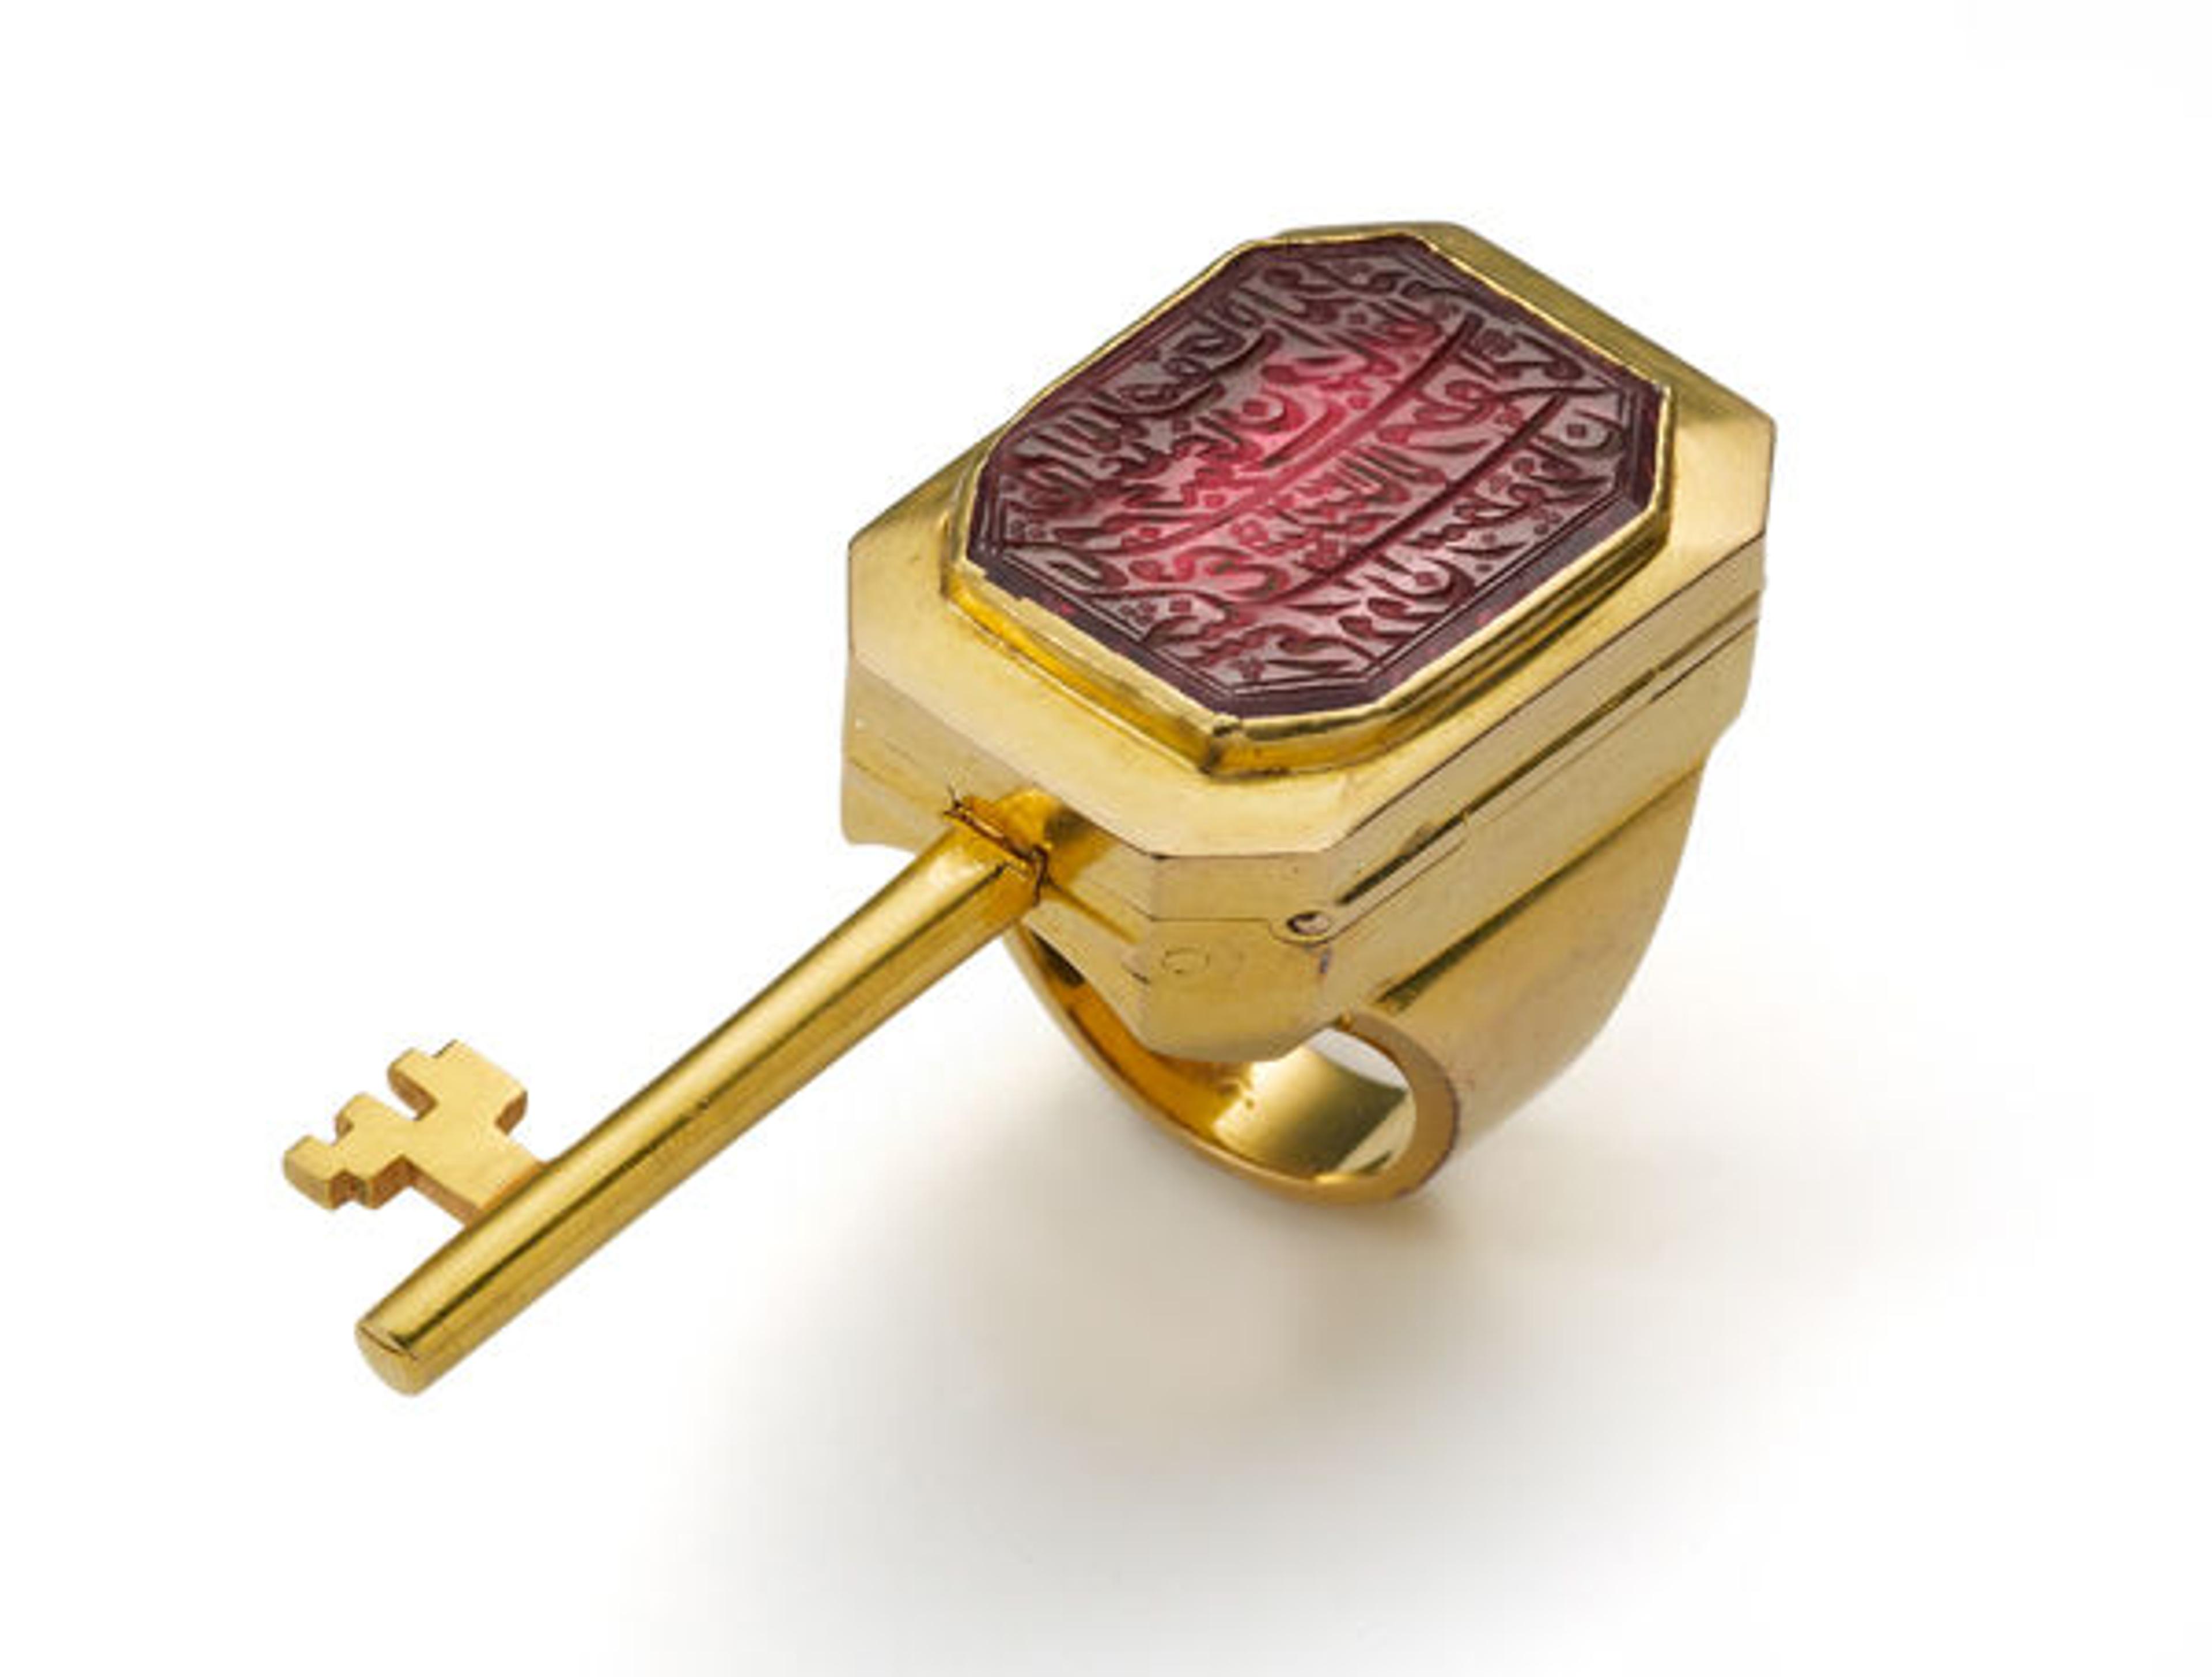 Seal Ring with Hidden Key, 1884–1885. South India, Hyderabad. Gold, set with spinel; H. 1 1/8 in. (2.7 cm), W. 1 1/8 in. (2.8 cm); W. (with key extended) 2 1/8 in. (5.3 cm). The Al-Thani Collection.